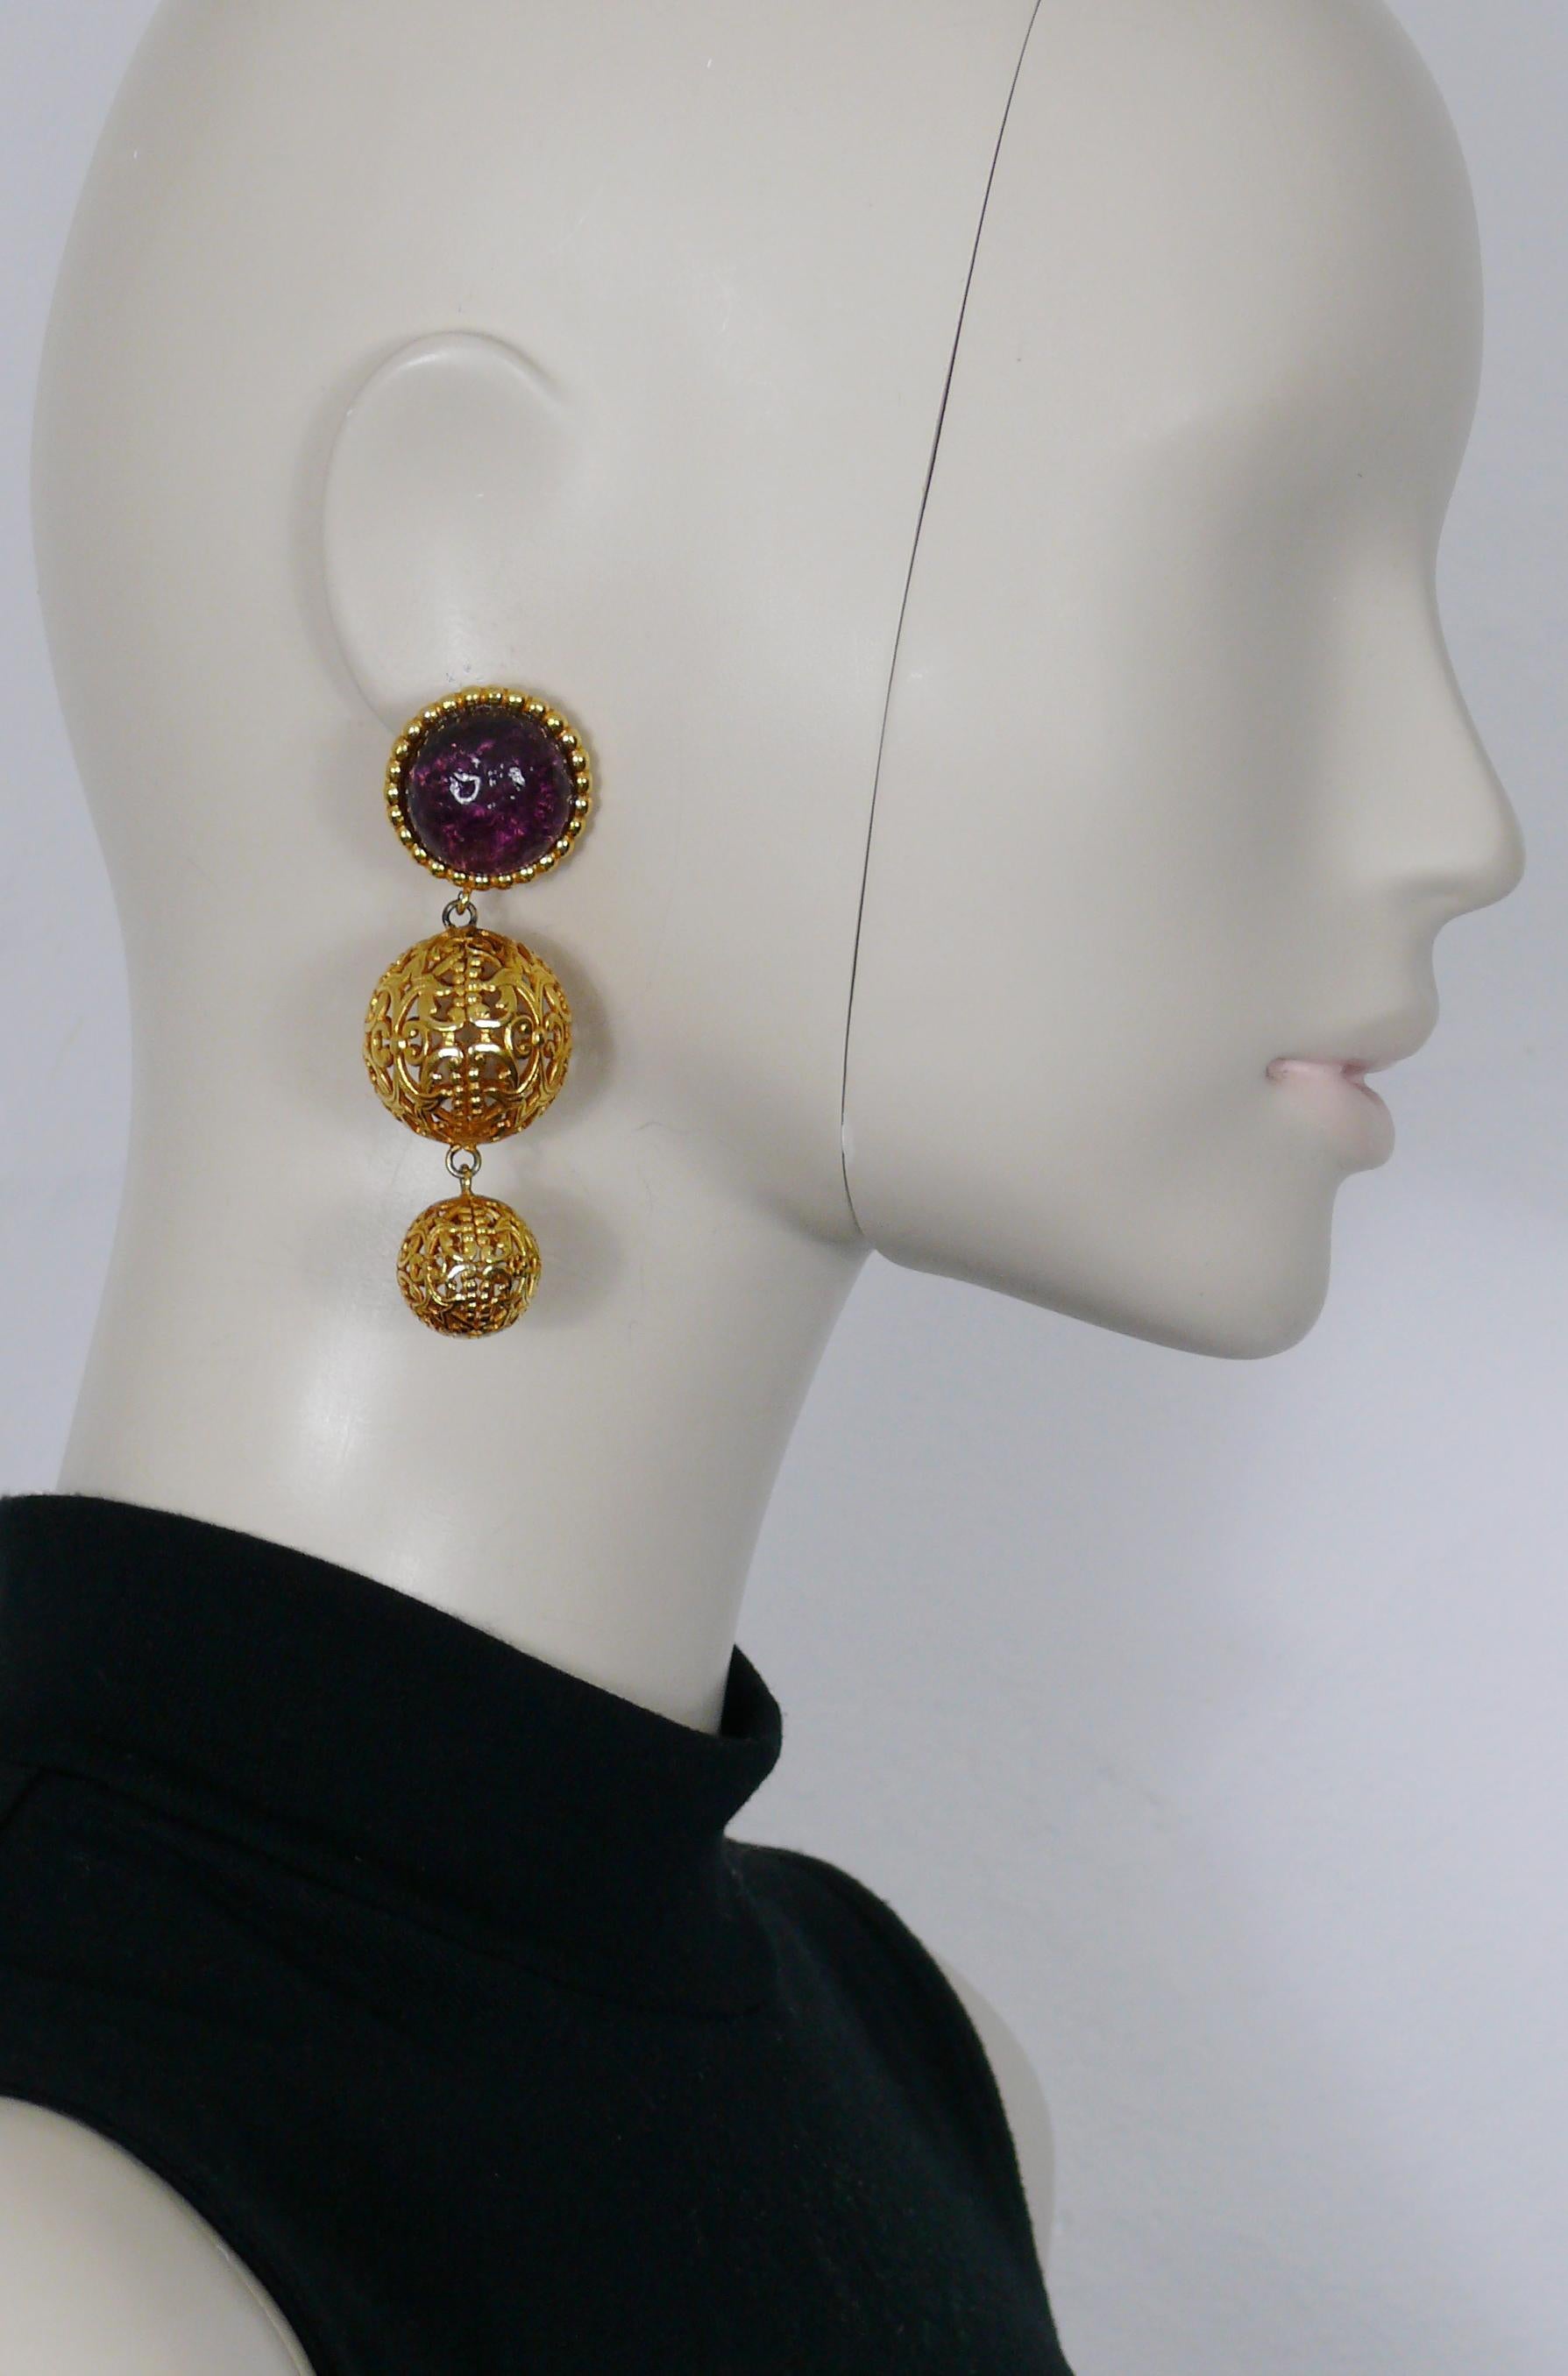 DOMINIQUE AURIENTIS vintage gold toned filigree balls dangling earrings (clip-on) featuring a textured purple resin cabochon top.

Embossed DOMINIQUE AURIENTIS Paris.

Indicative measurements : height approx. 7.6 cm (2.99 inches) / max. width